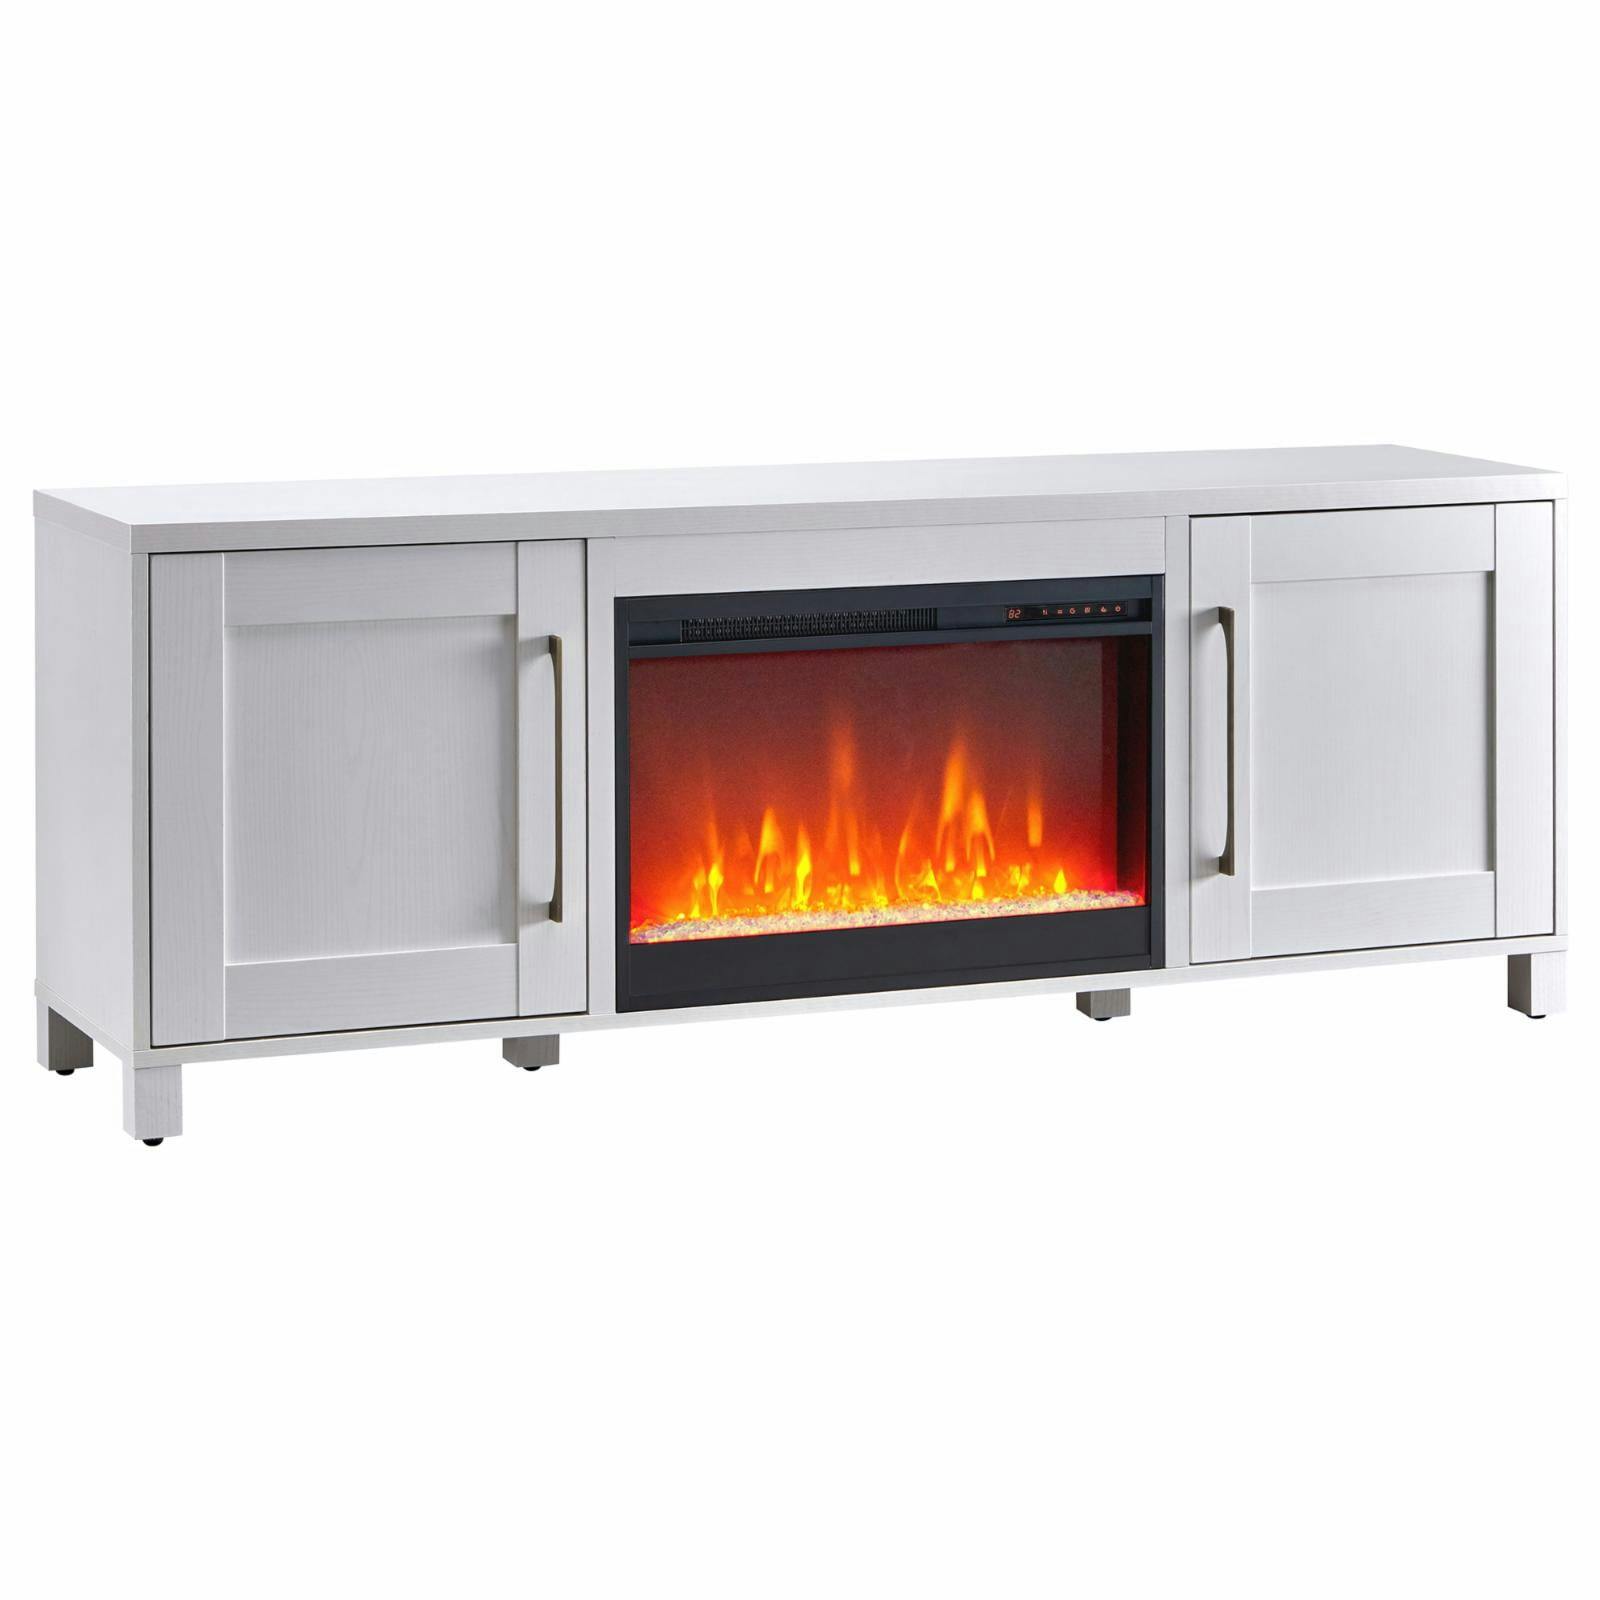 Modern 75" White Freestanding TV Stand & Fireplace with Cabinet Storage